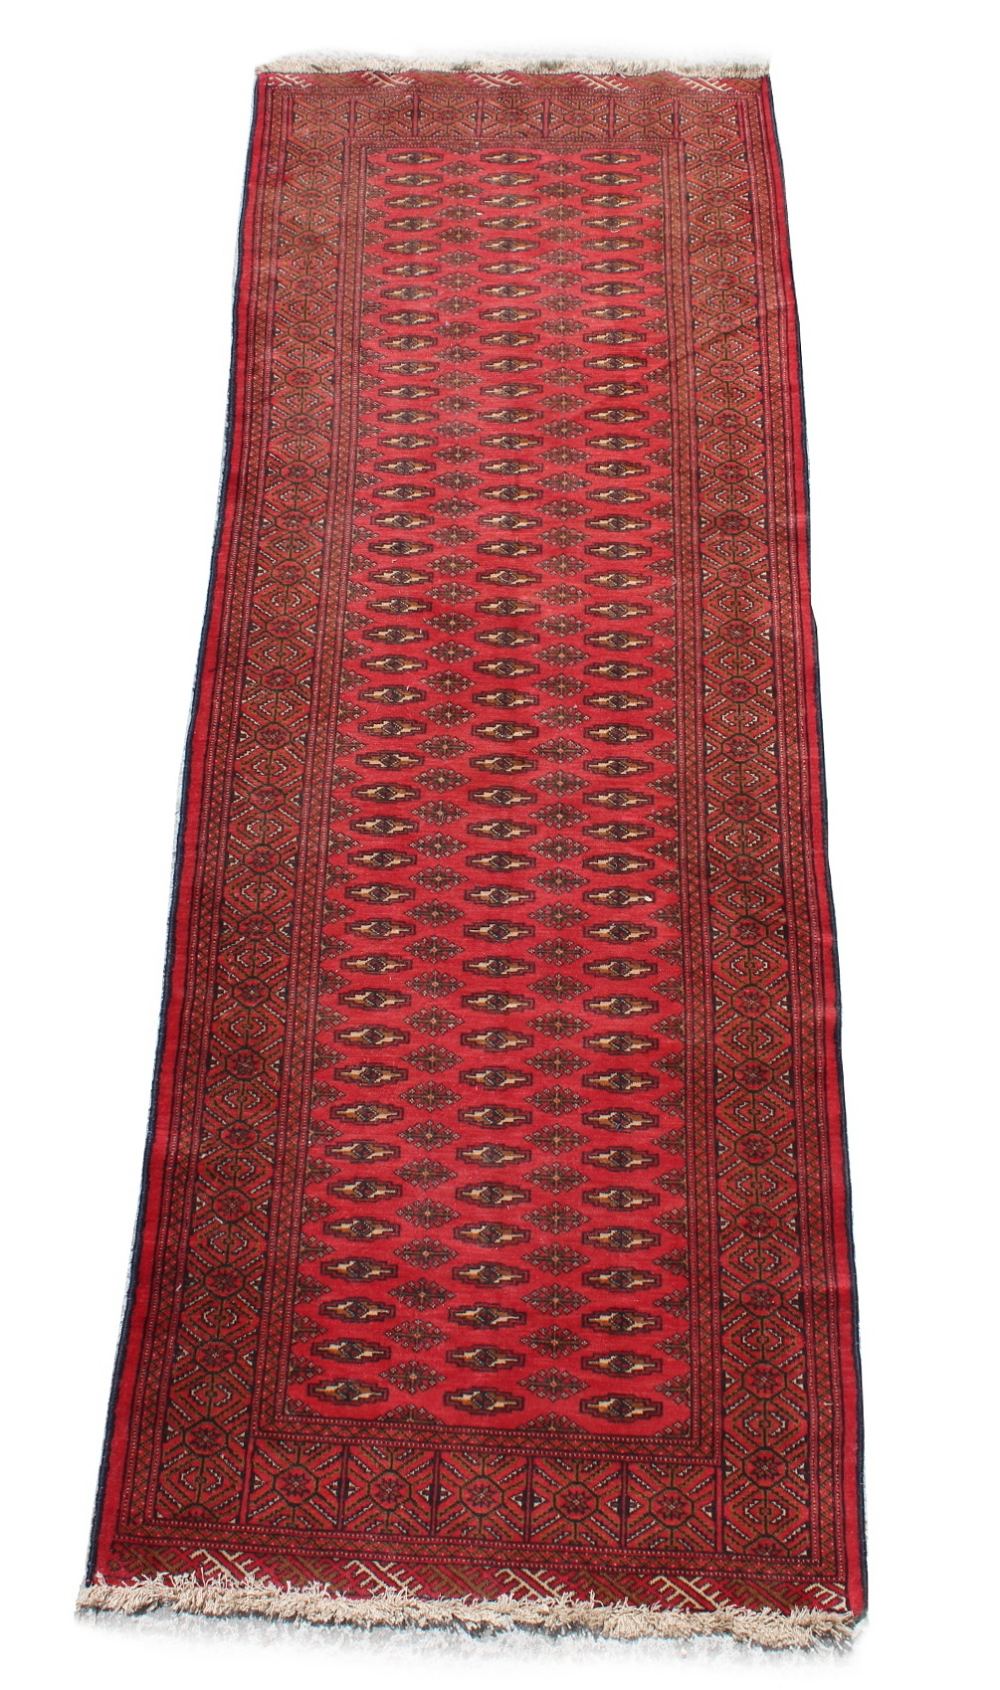 A Turkoman woollen hand-made carpet with red ground, 115 by 46ins. (290 by 103cms.).